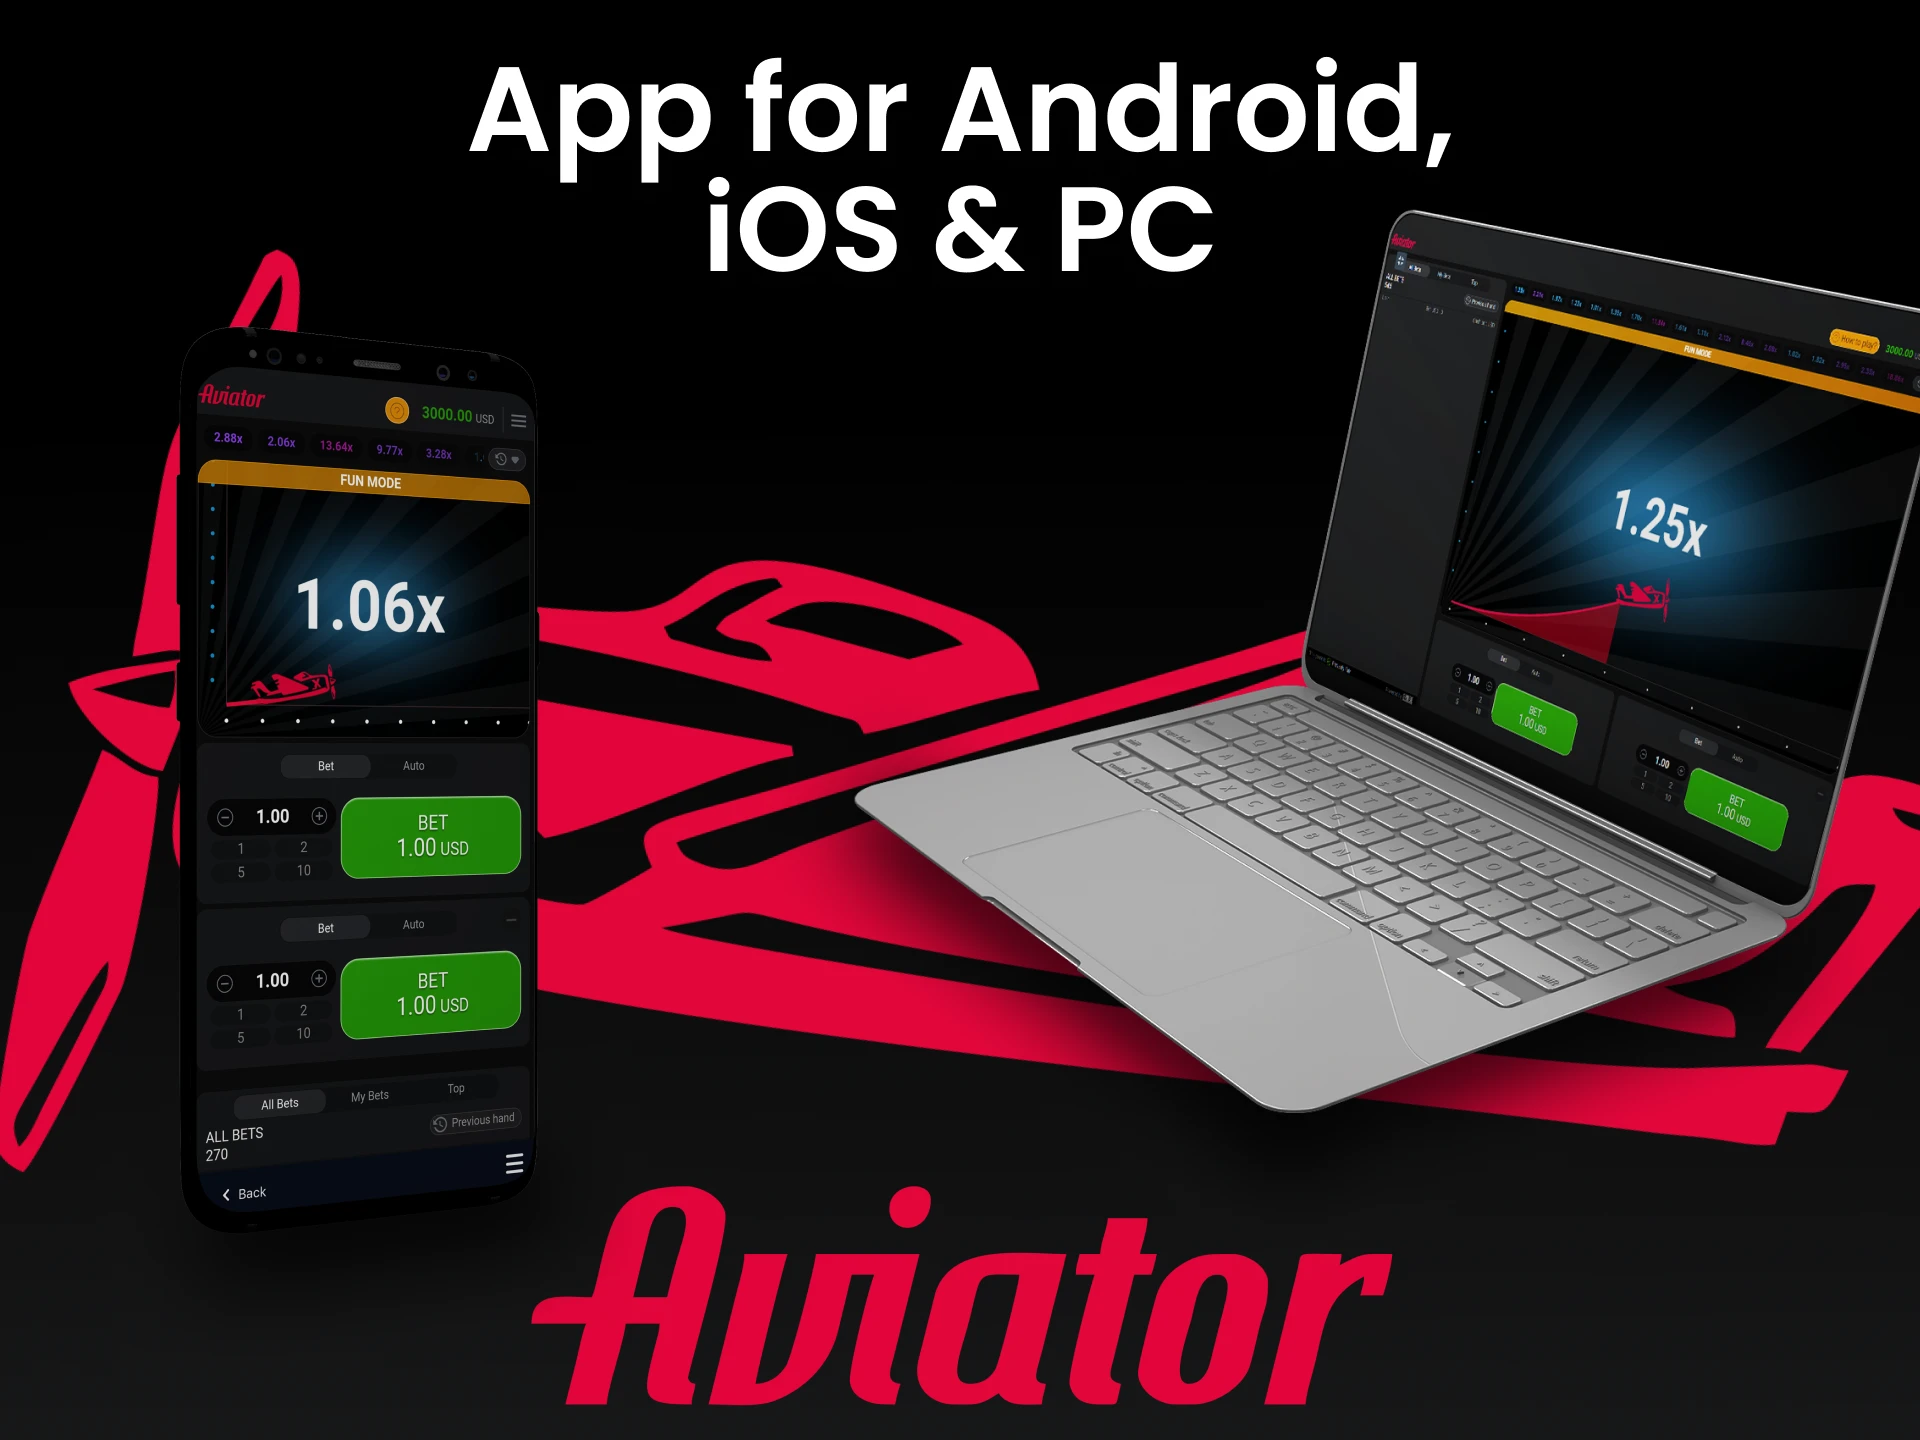 Download betting app and play Aviator on any of your devices (Android, iOS, PC).